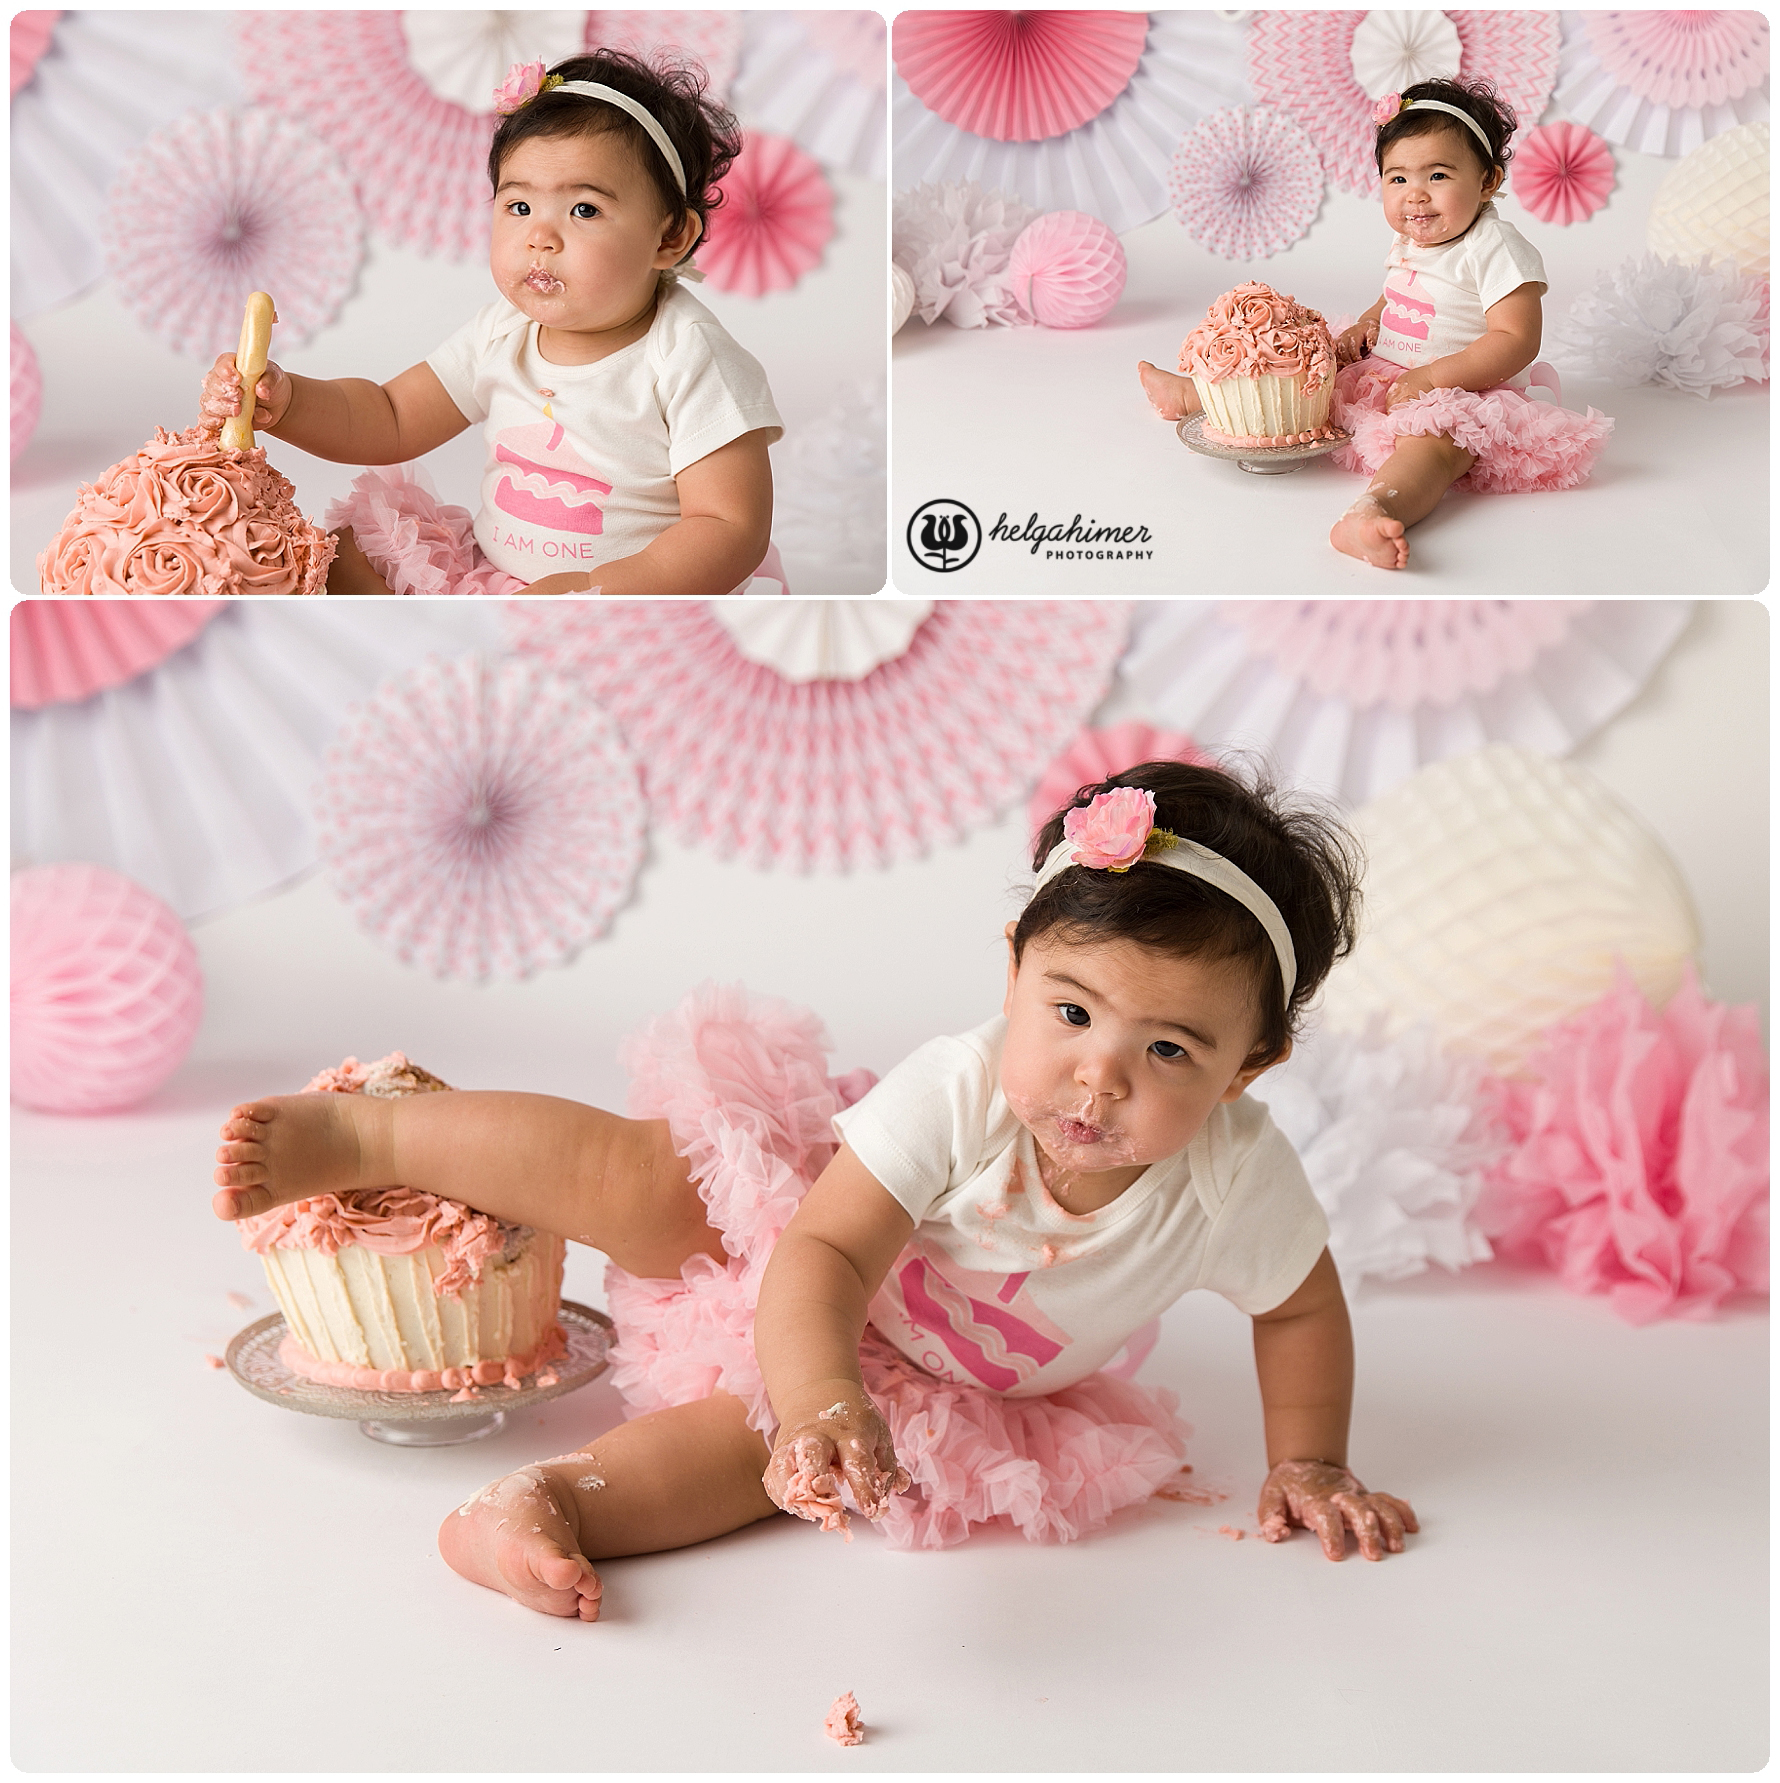 cakesmash session for a chines little girl in pink, the background have pinwheels and she is wearing a pink tutu